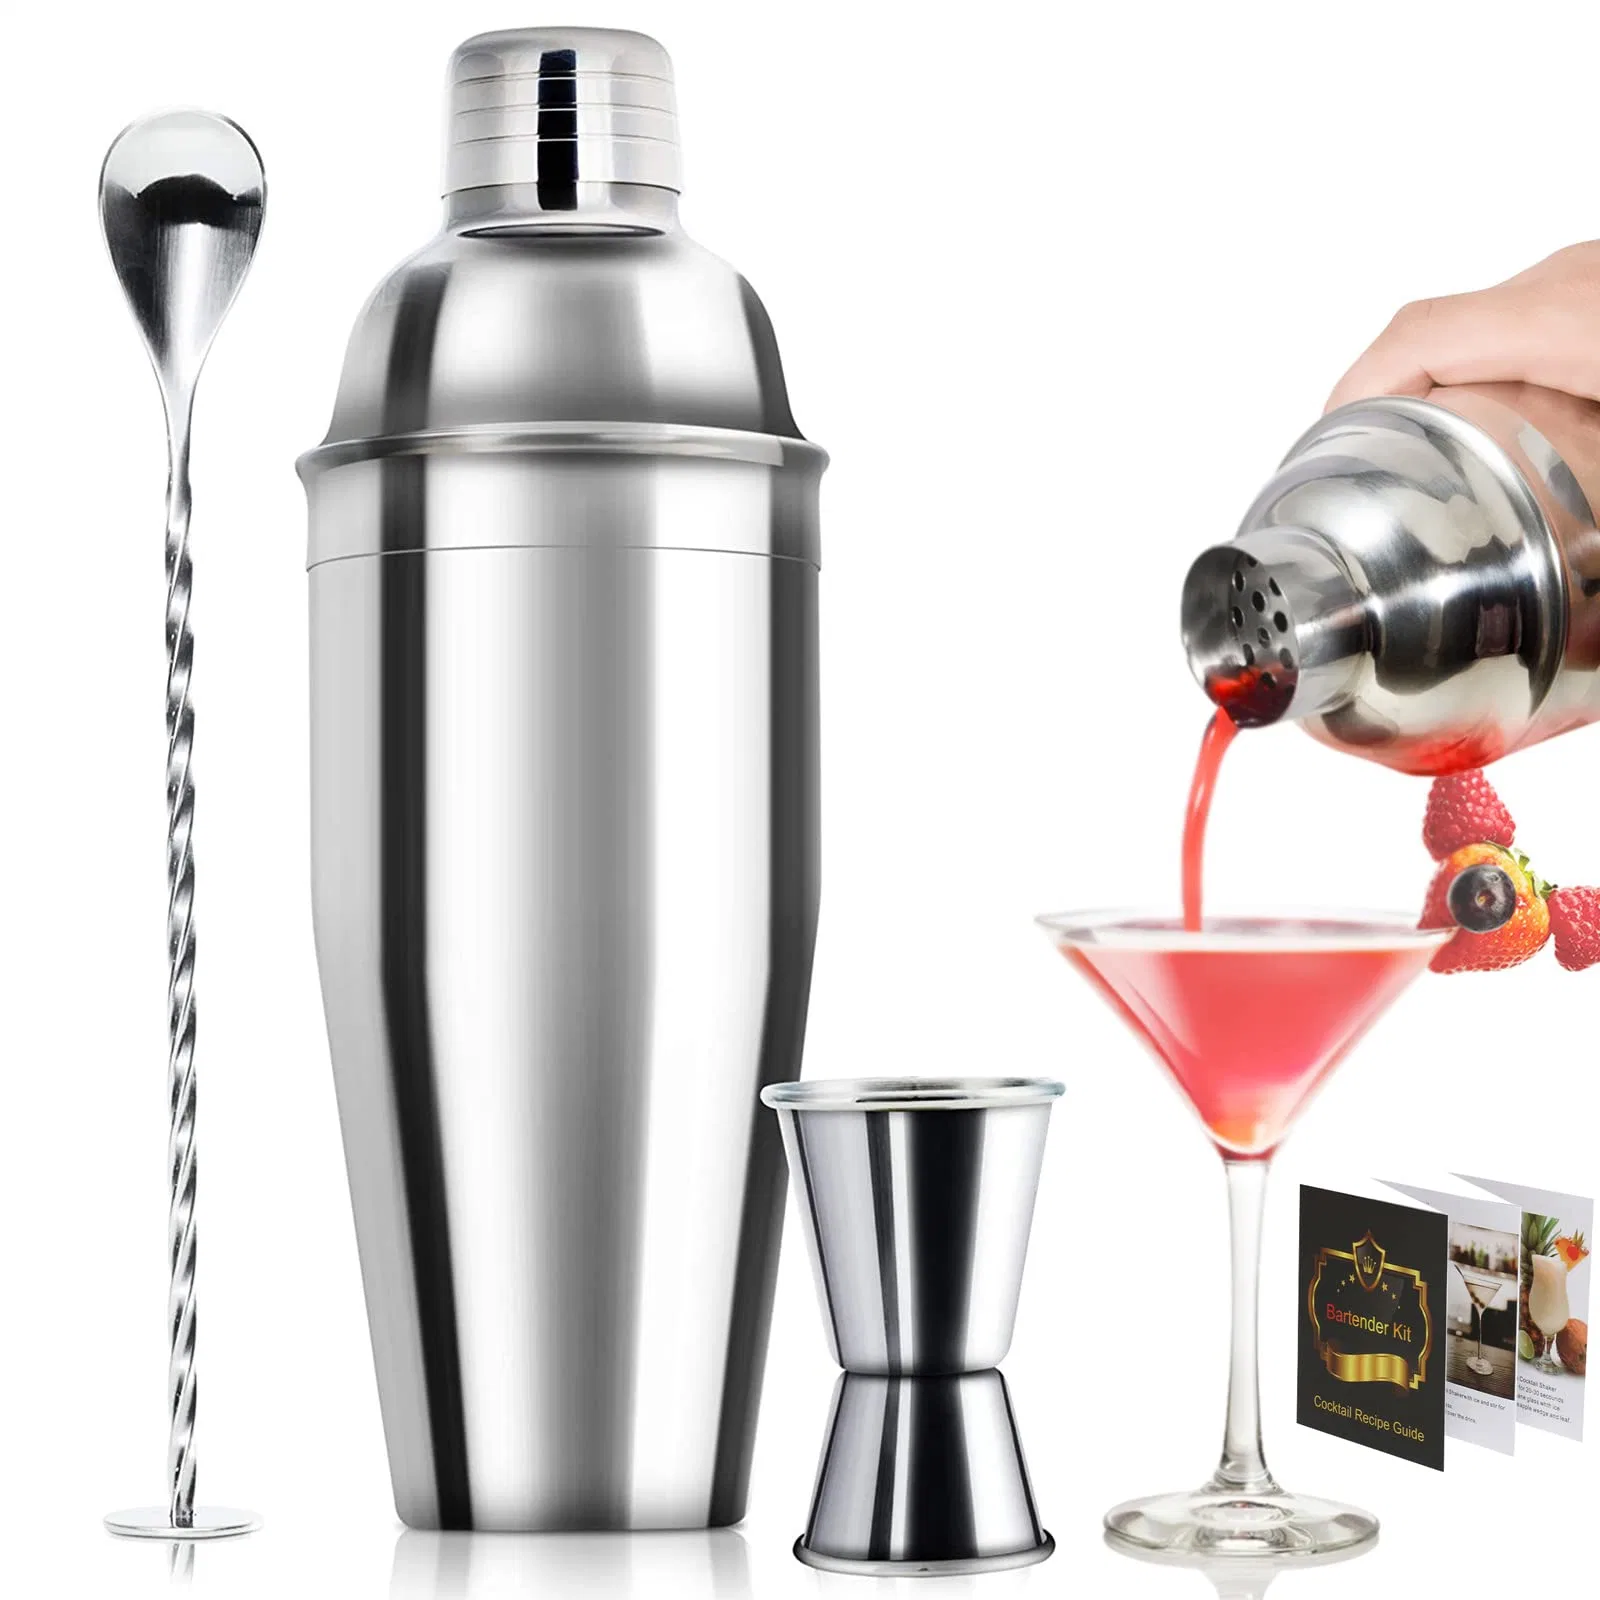 Shaker Set Mixer Drink Measuring Jigger Mixing Spoon Stainless Steel Bar Tools Cocktail Shaker